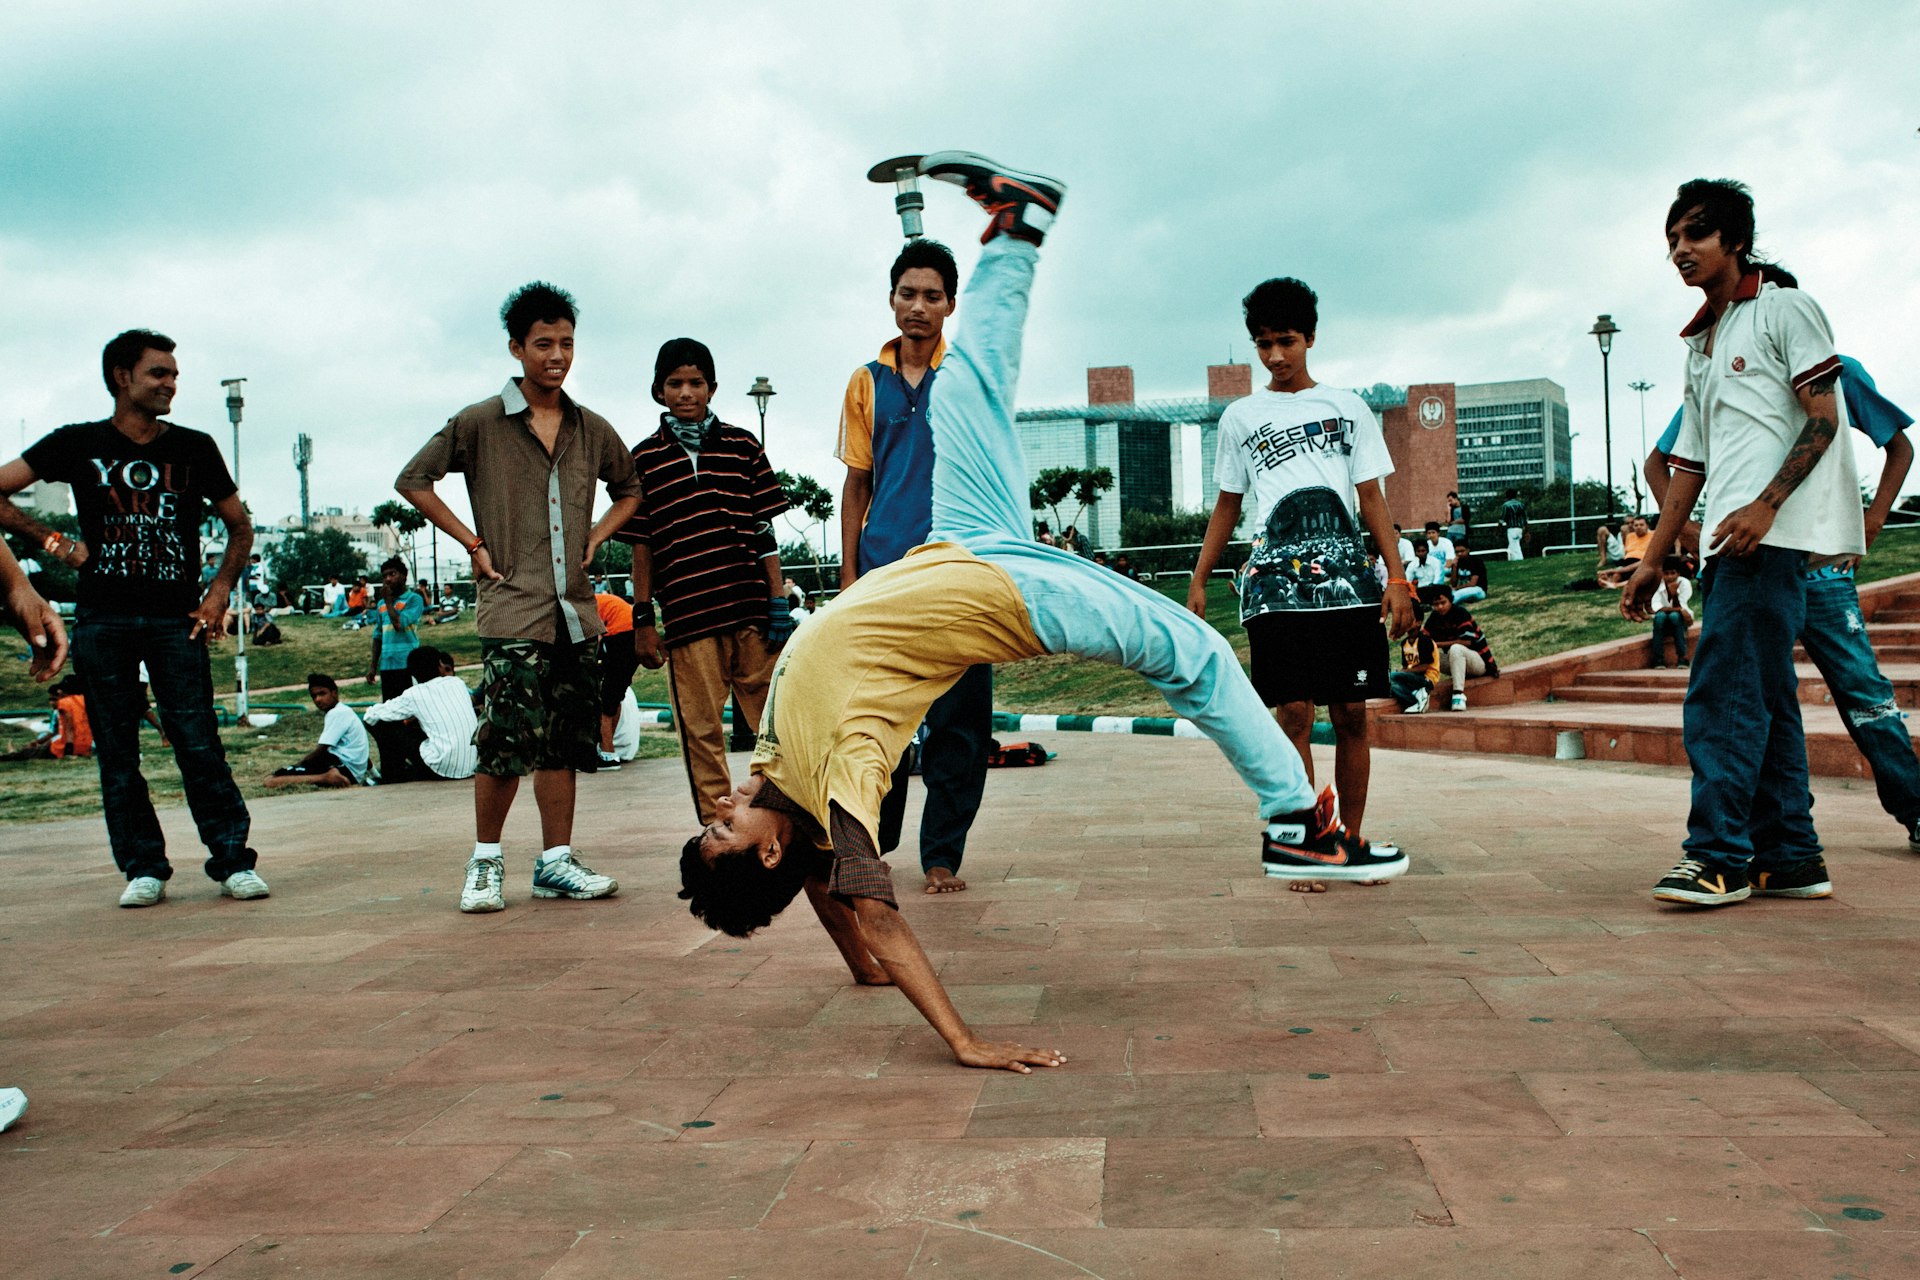 The Delhi b-boys breaking down barriers of caste and class